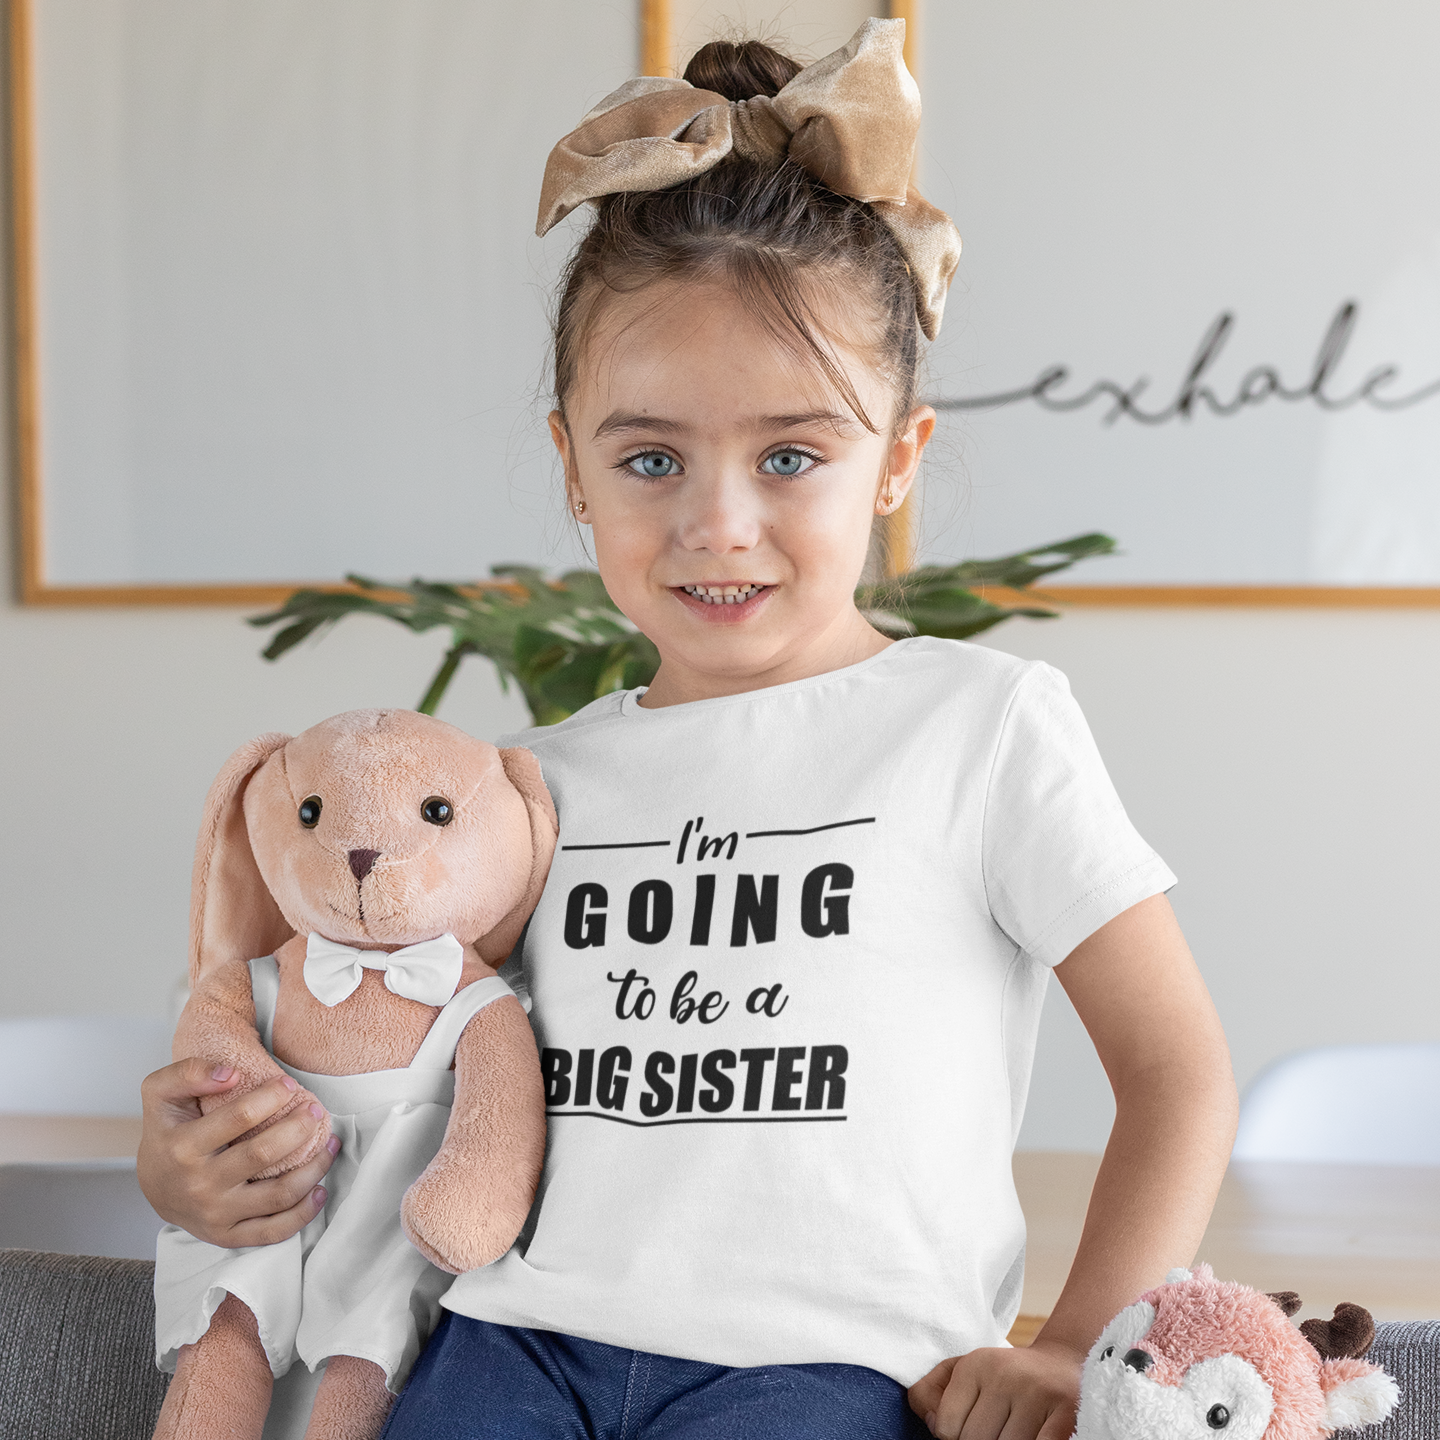 I'm Going To Be a Big Sister White Tshirt